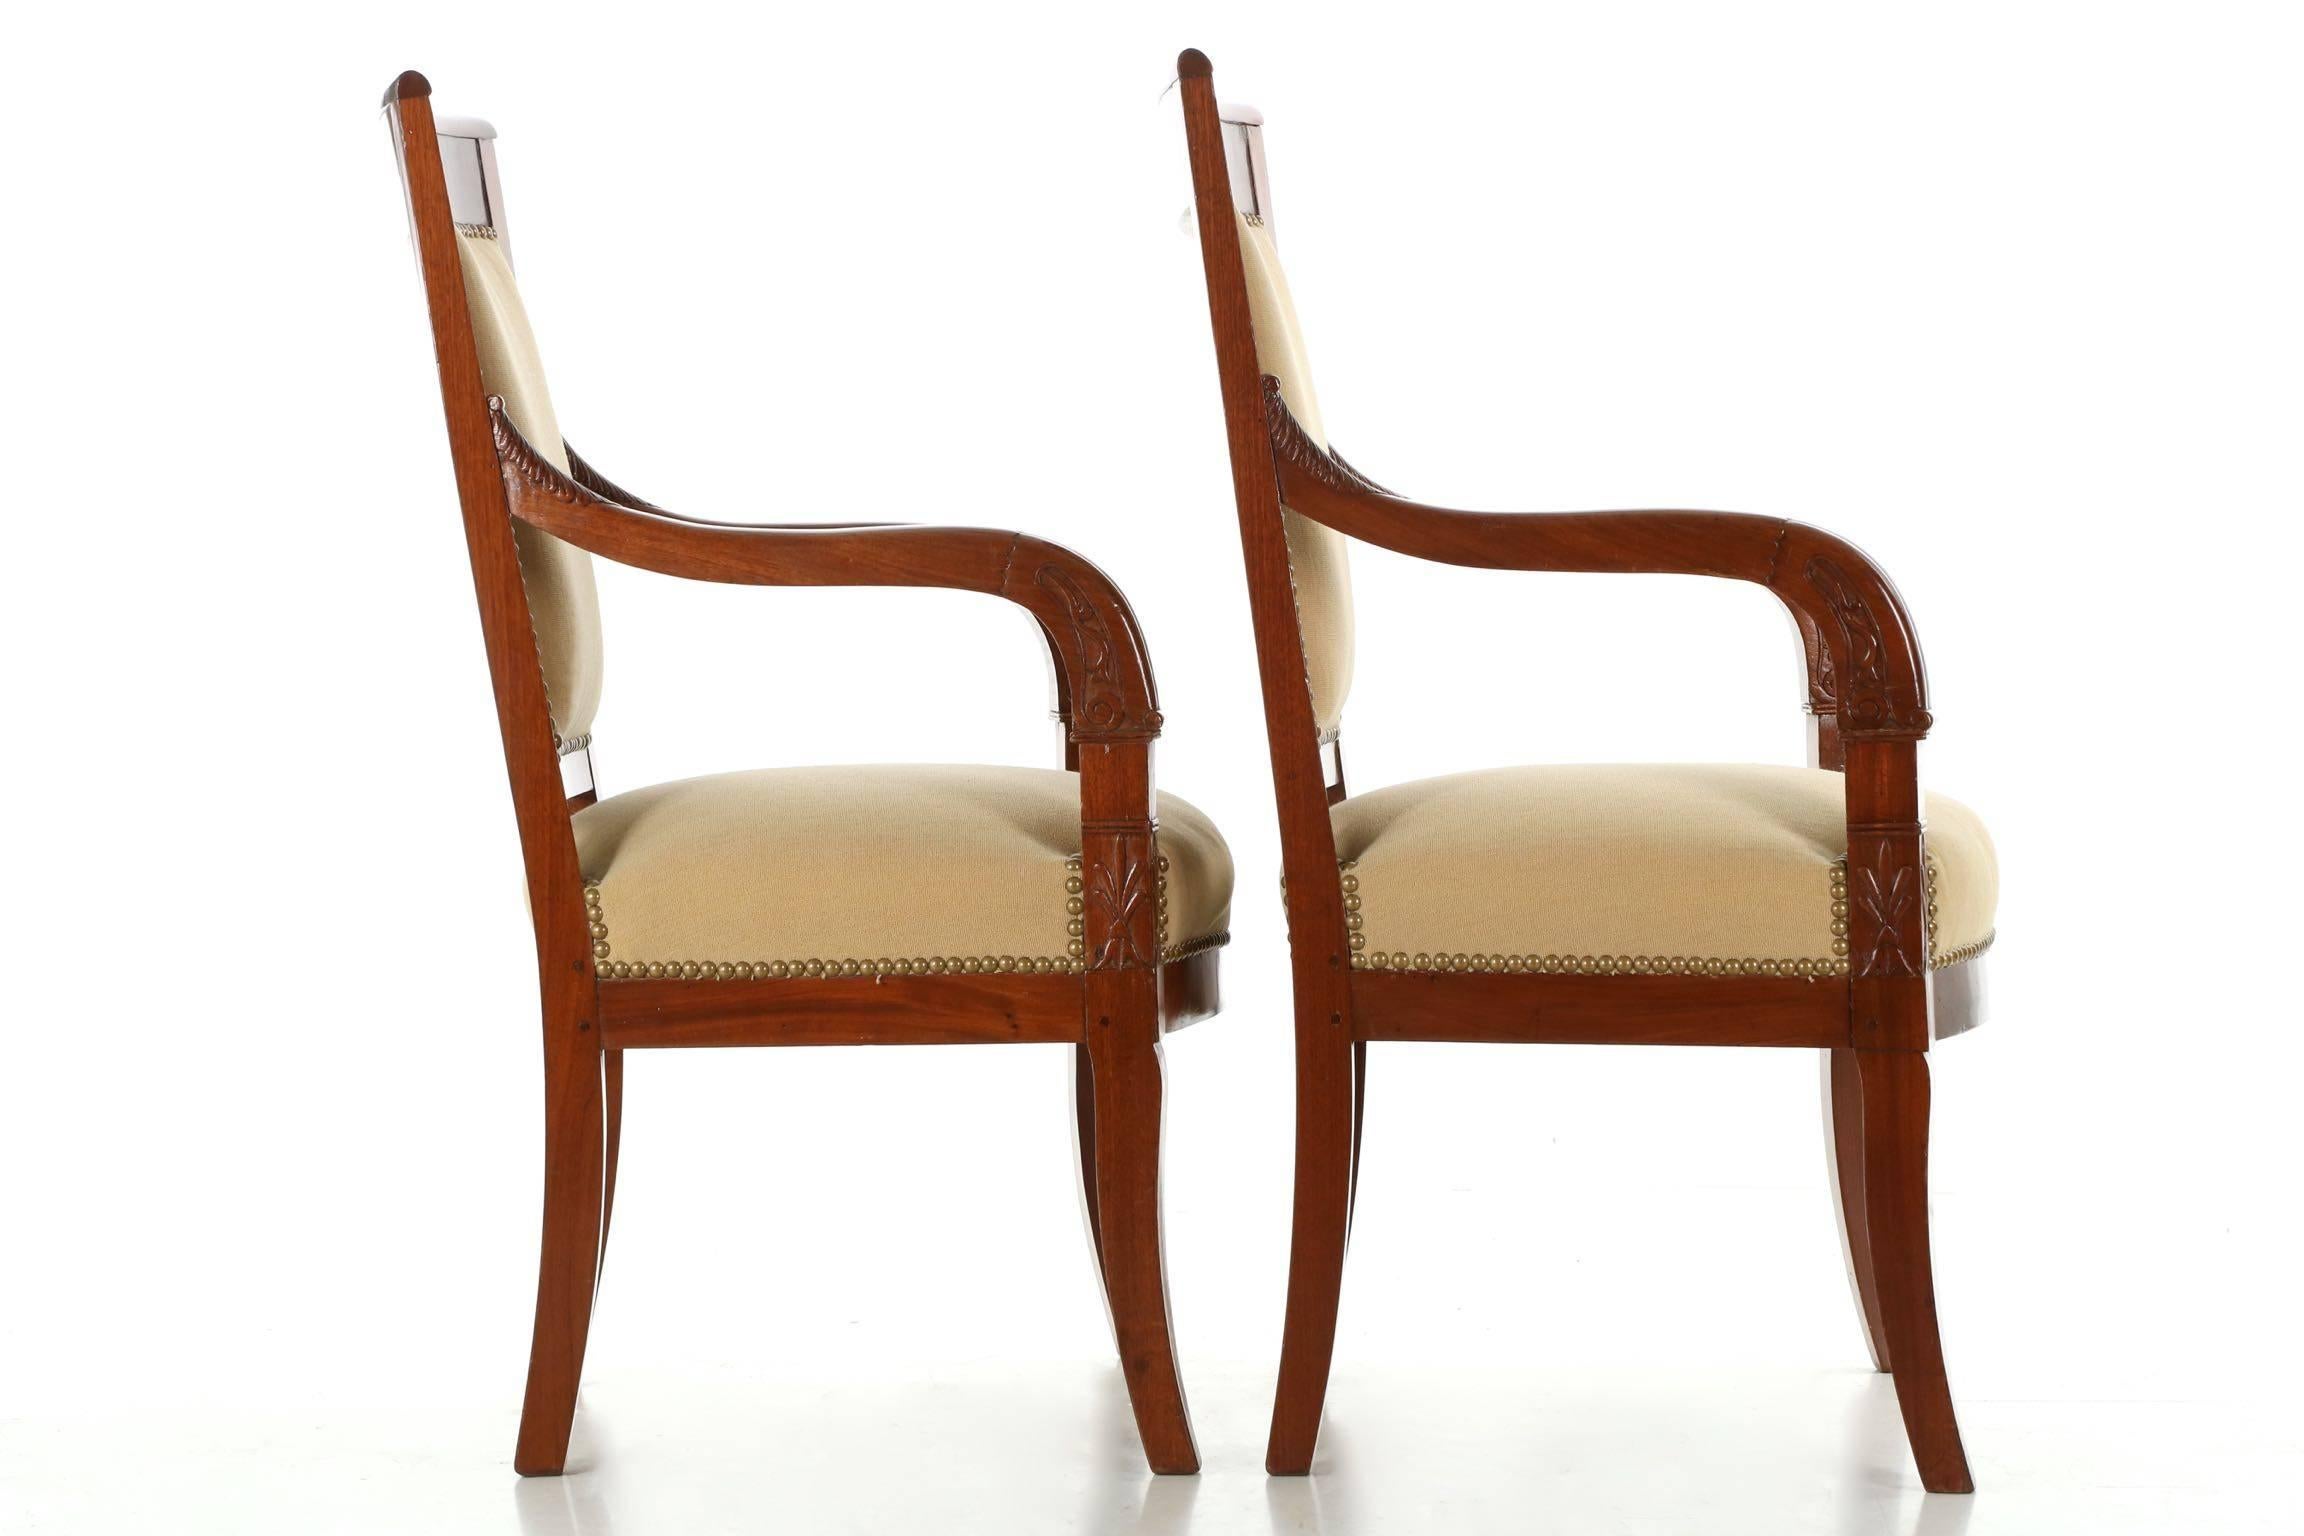 European French Empire Style Pair of Antique Mahogany Armchairs, 20th Century